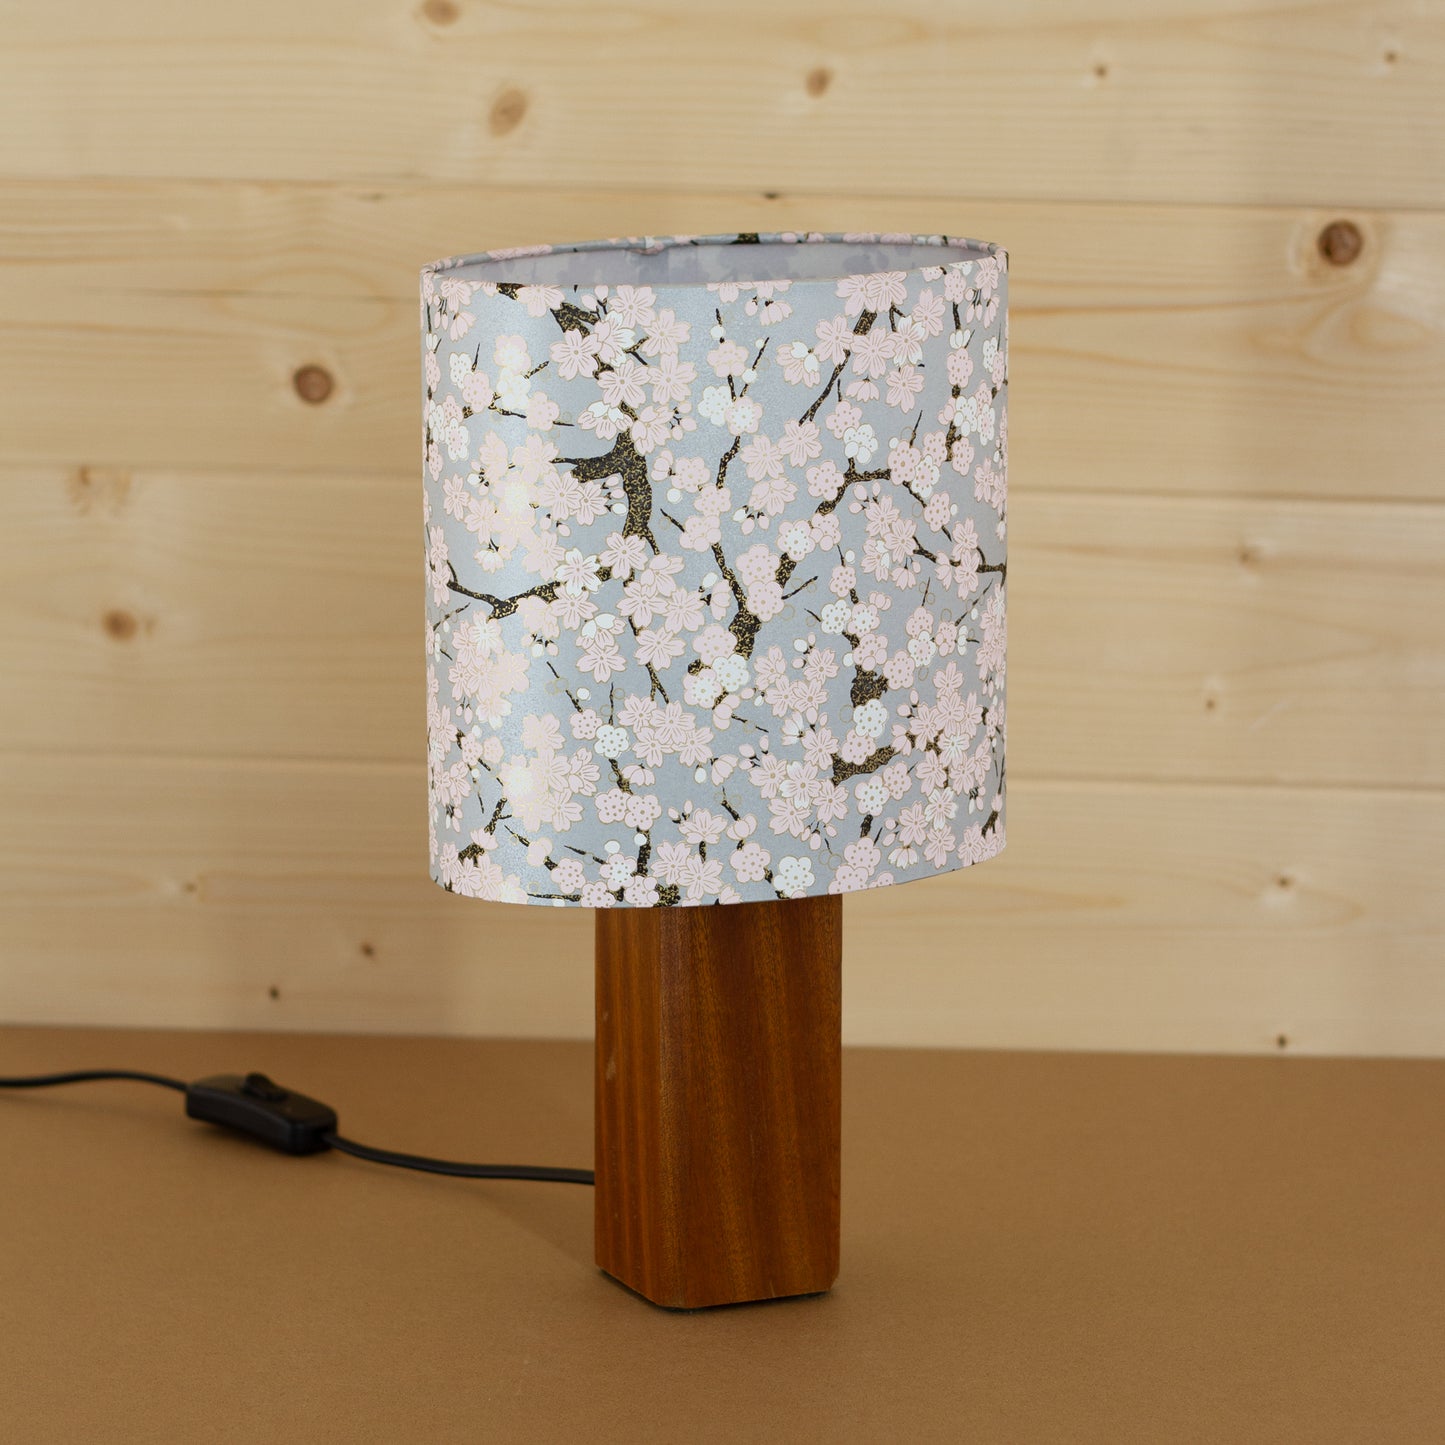 Square Sapele Table Lamp with 20cm Oval Lamp Shade W02 ~ Pink Cherry Blossom on Grey